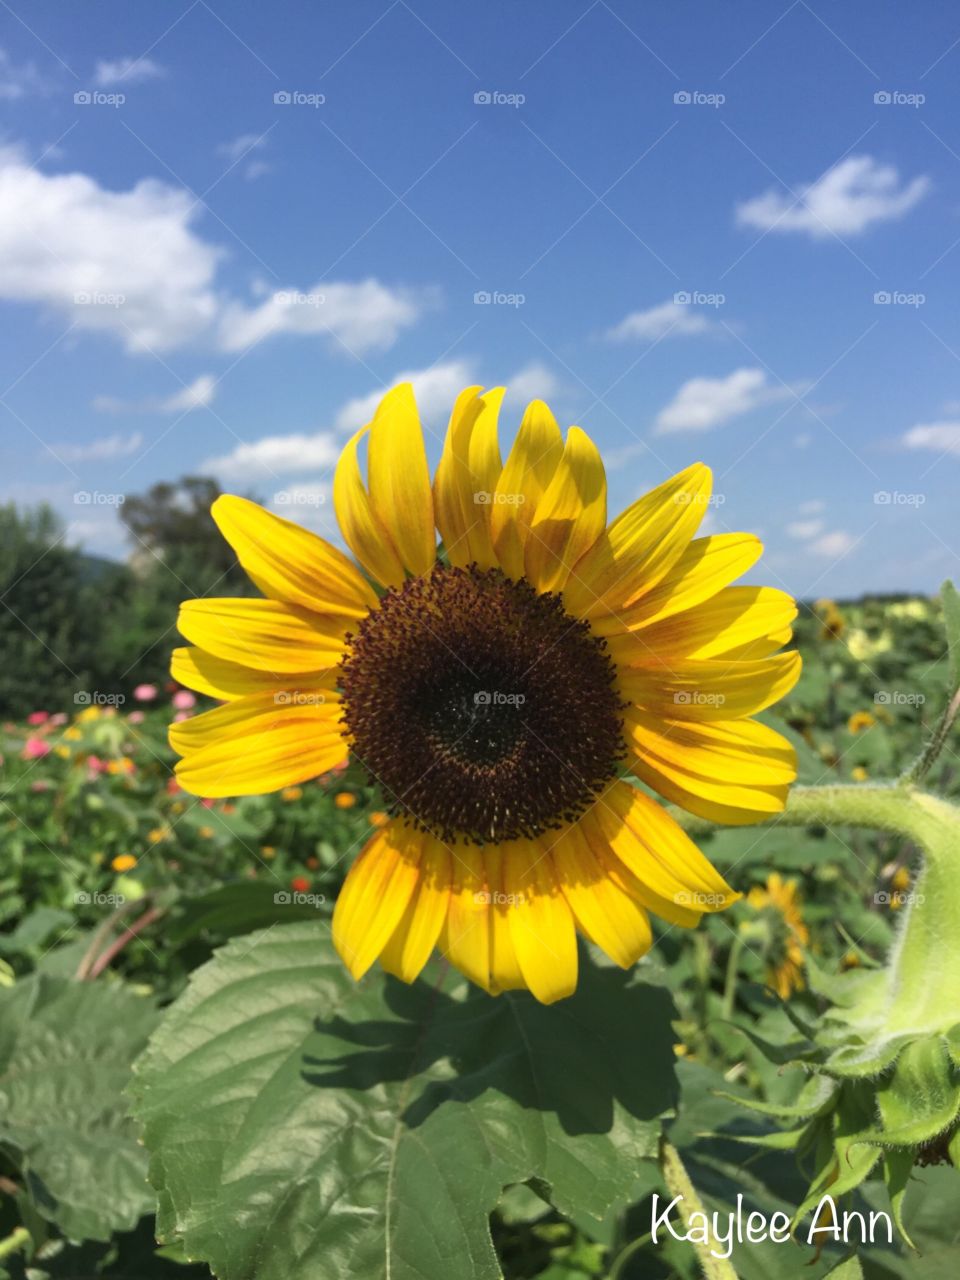 A Bright Sunflower Day